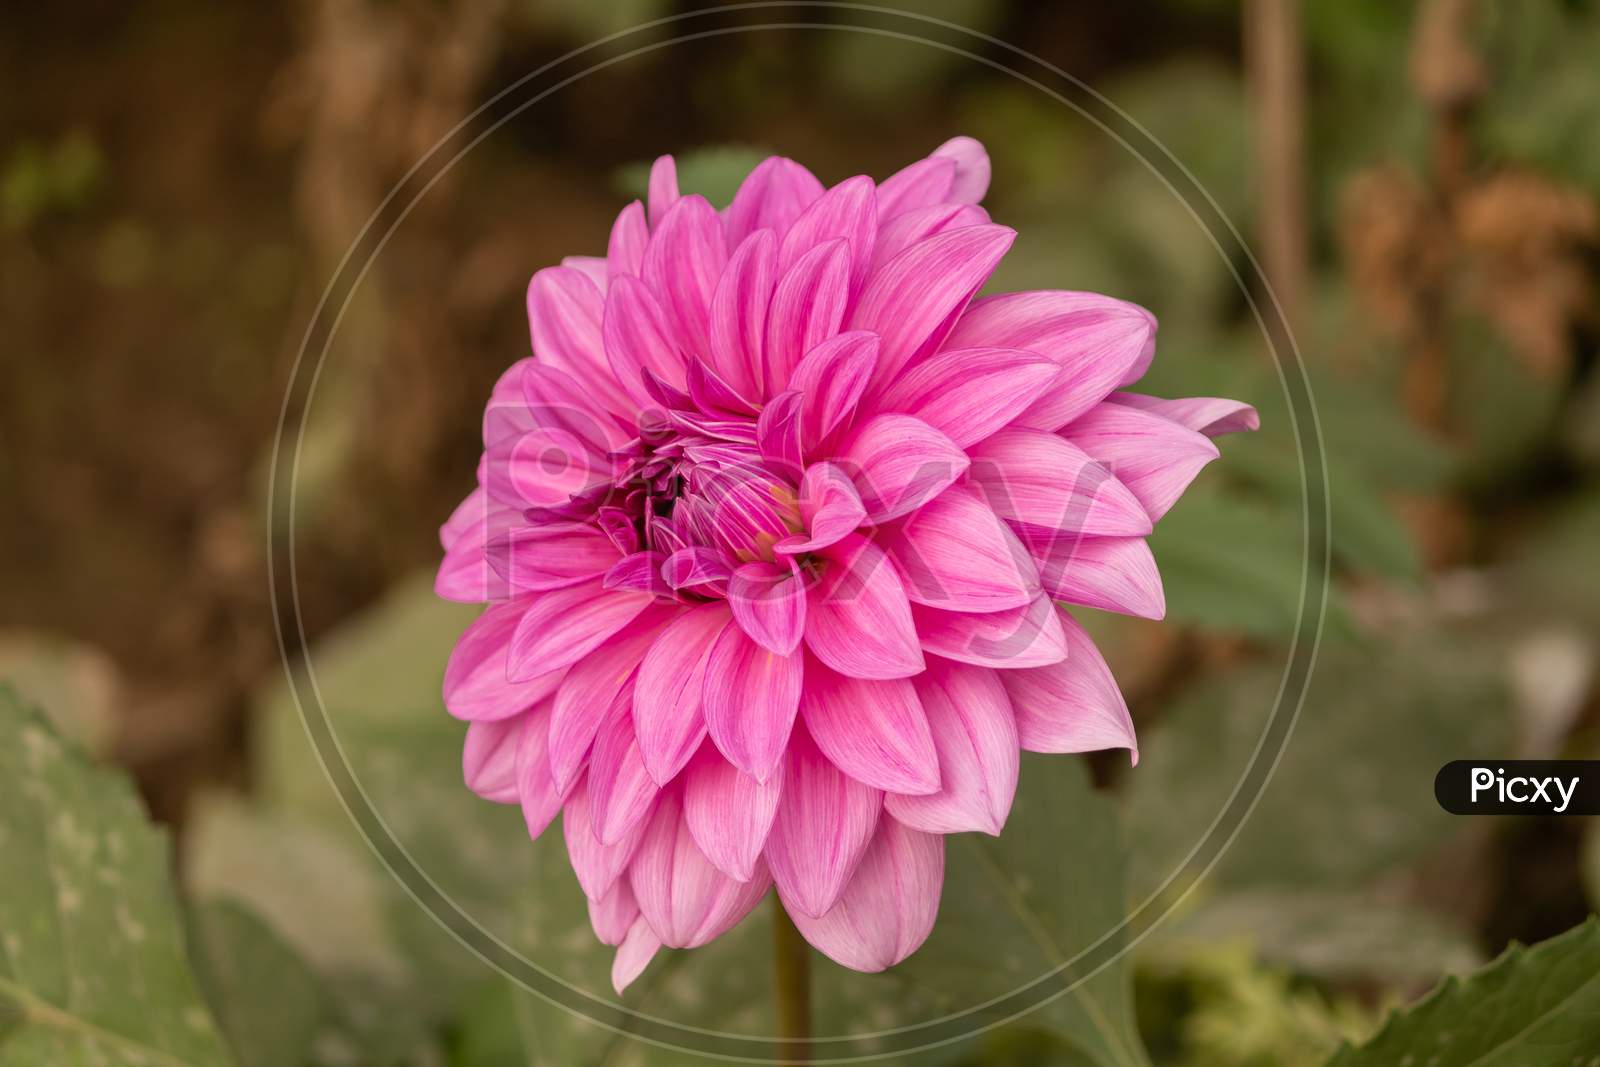 View Of Colorful Pink Daisy Flower In The Garden On A Stem In Cloudy Day Facing Left In Landscape Orientation